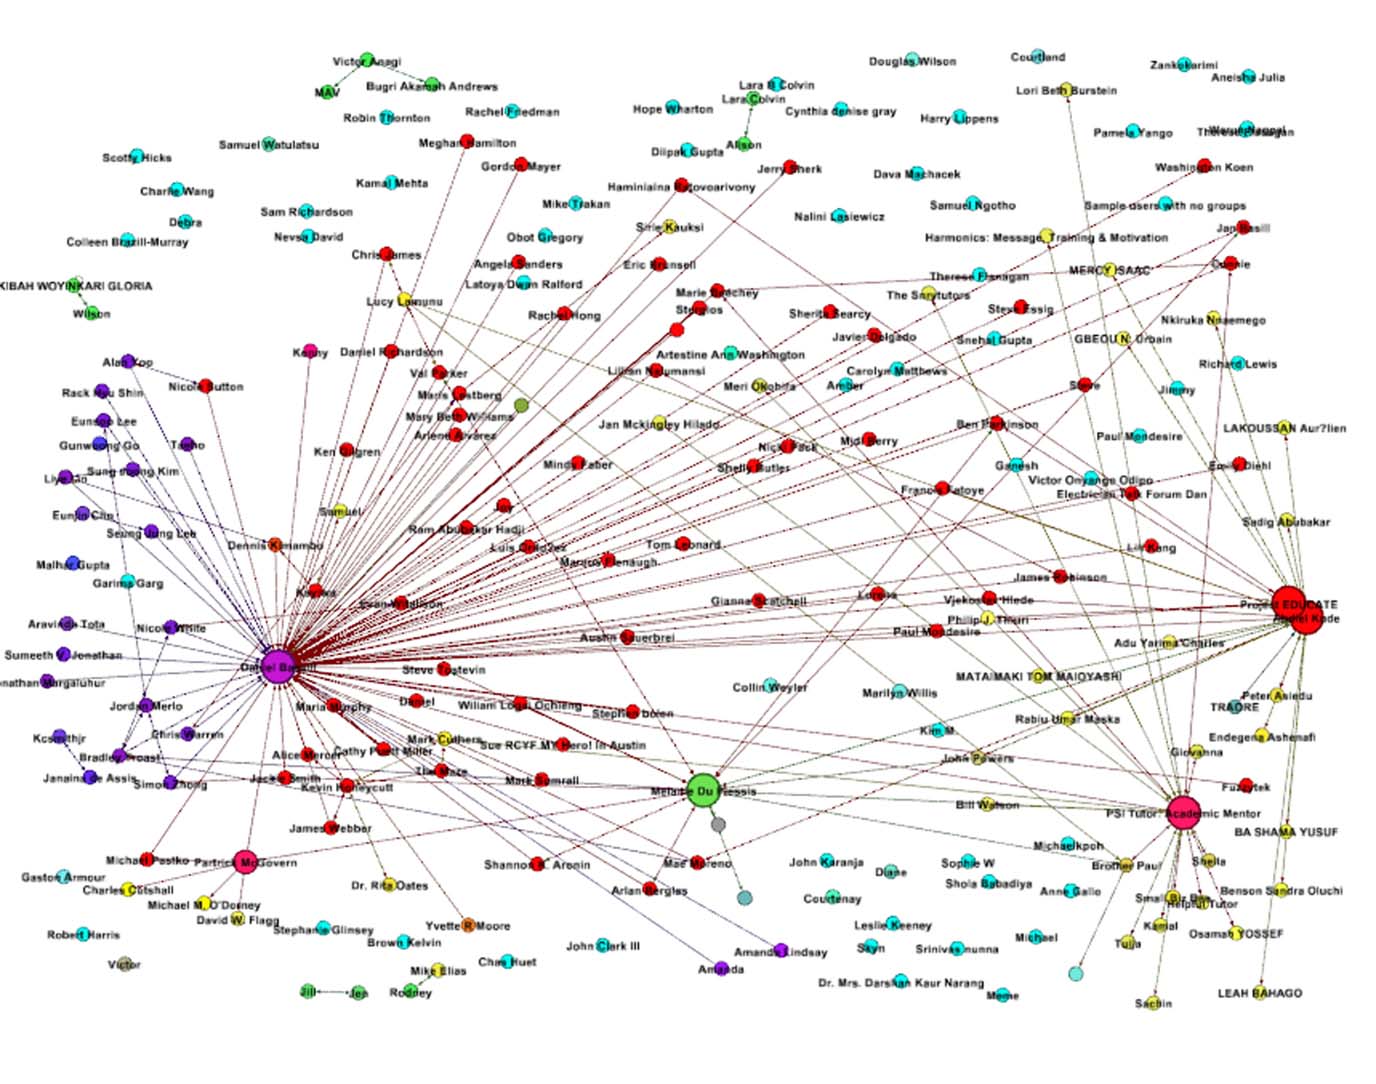 using ithoughtsx to create social network map